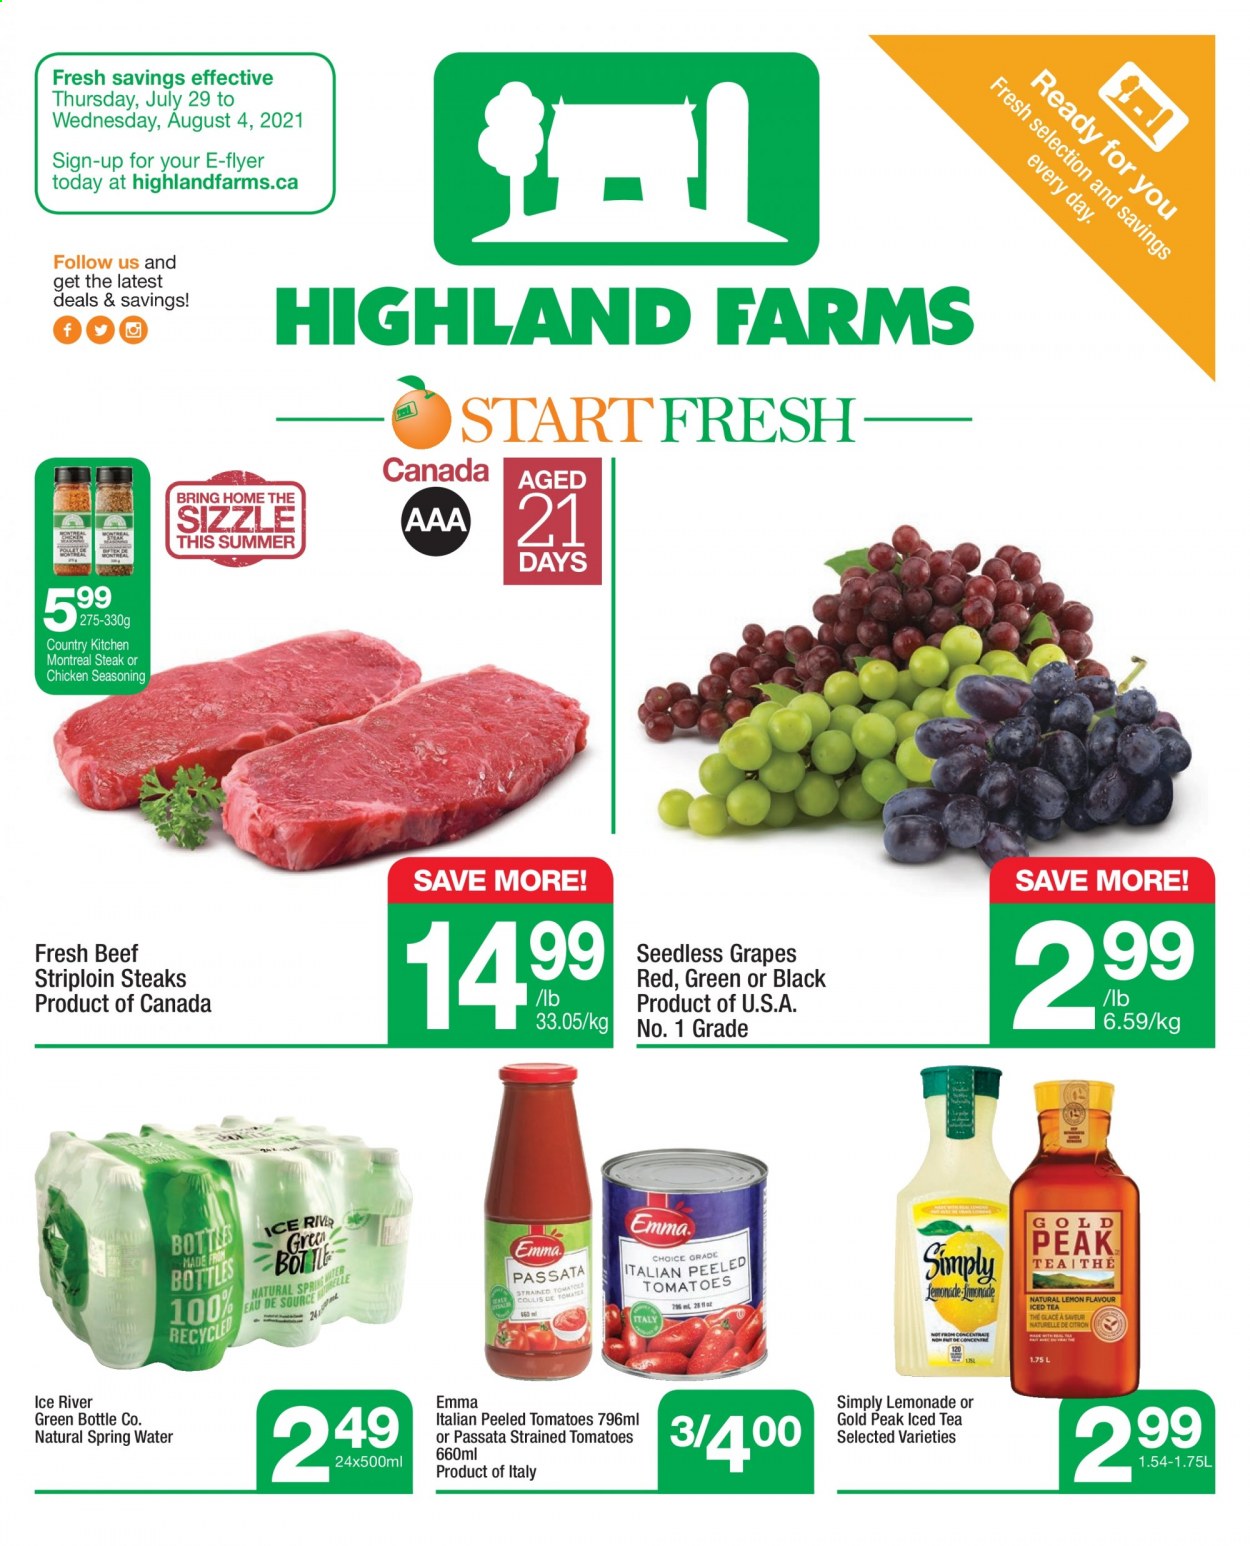 Highland Farms flyer  - July 29, 2021 - August 04, 2021.